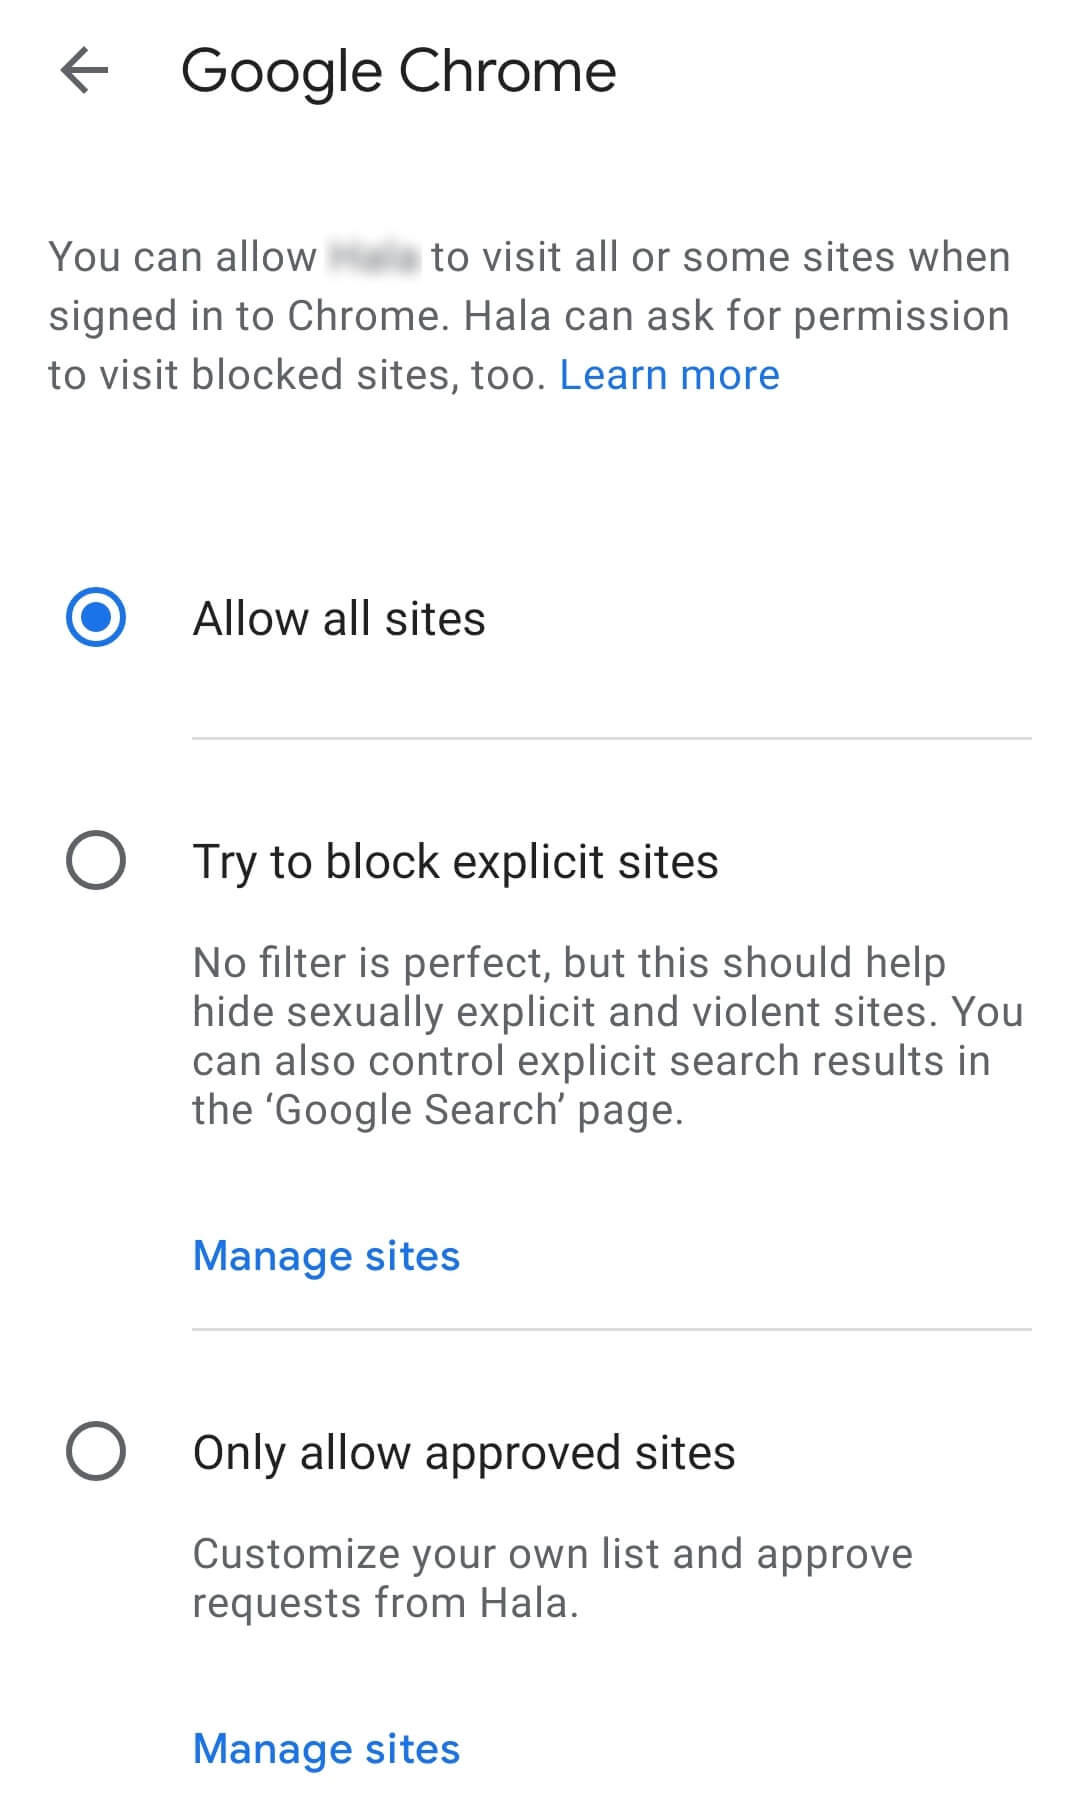 the Try to block explicit sites option is selected